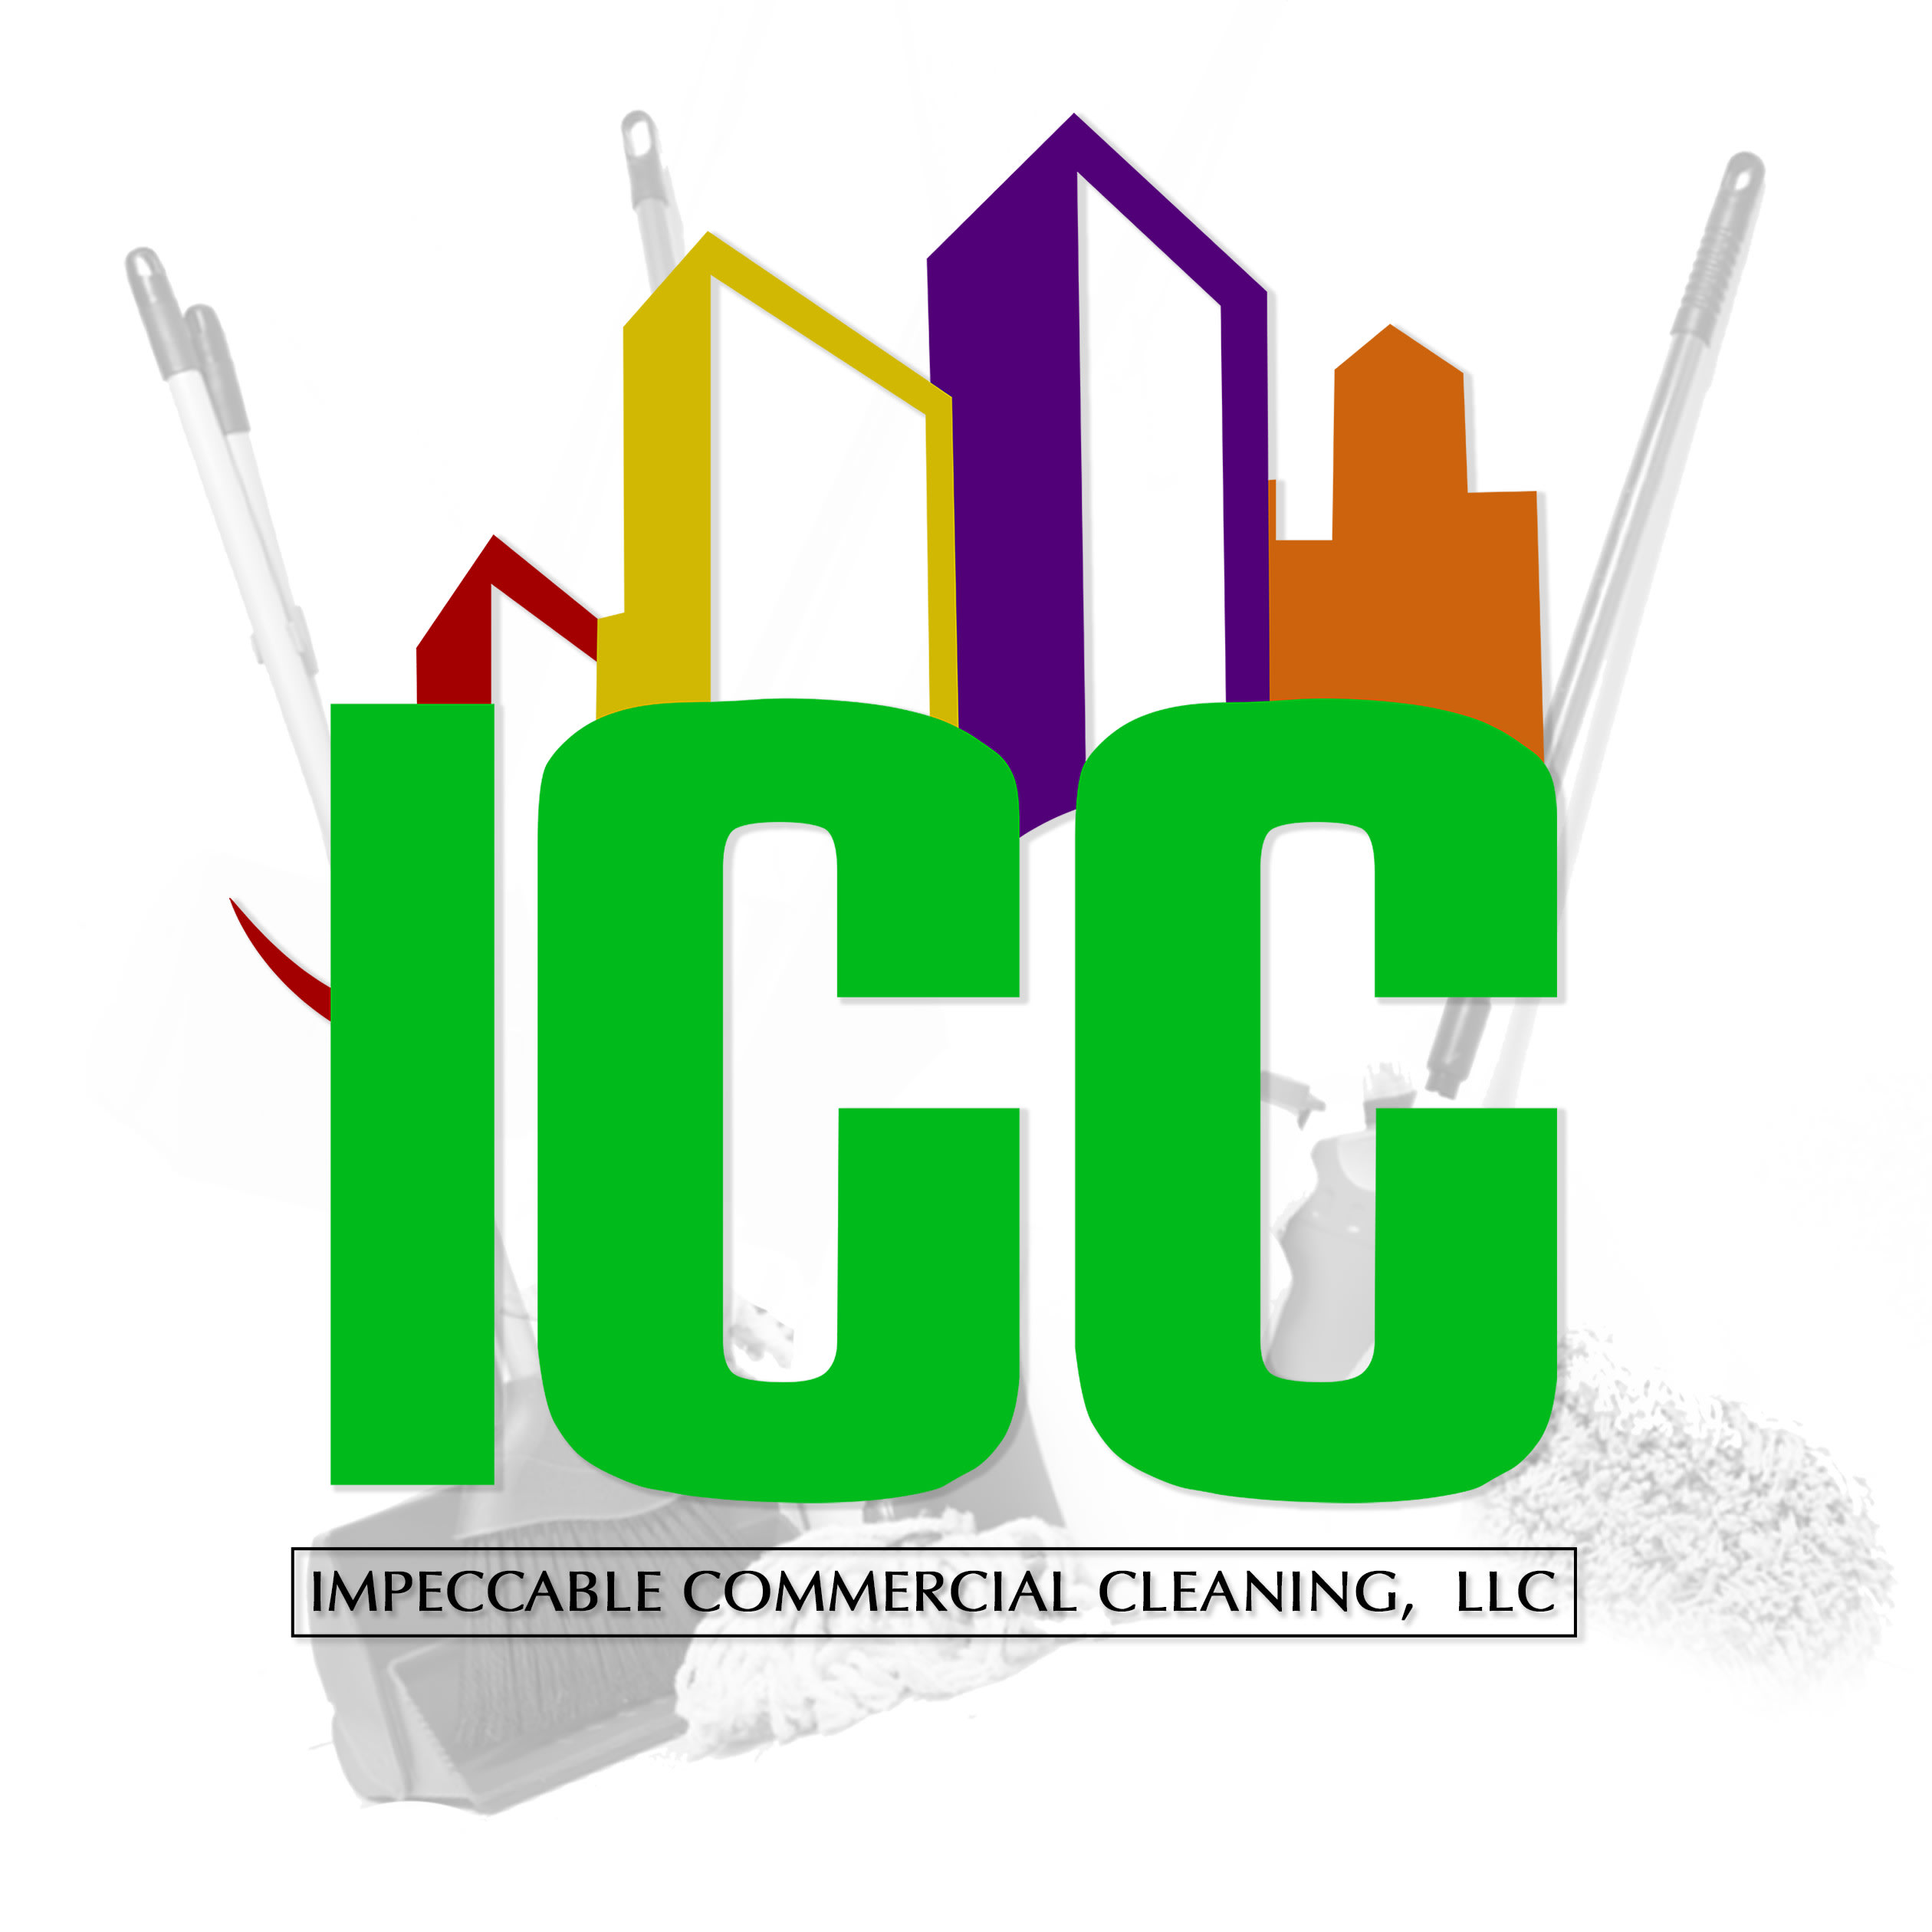 Impeccable Commercial Cleaning Service